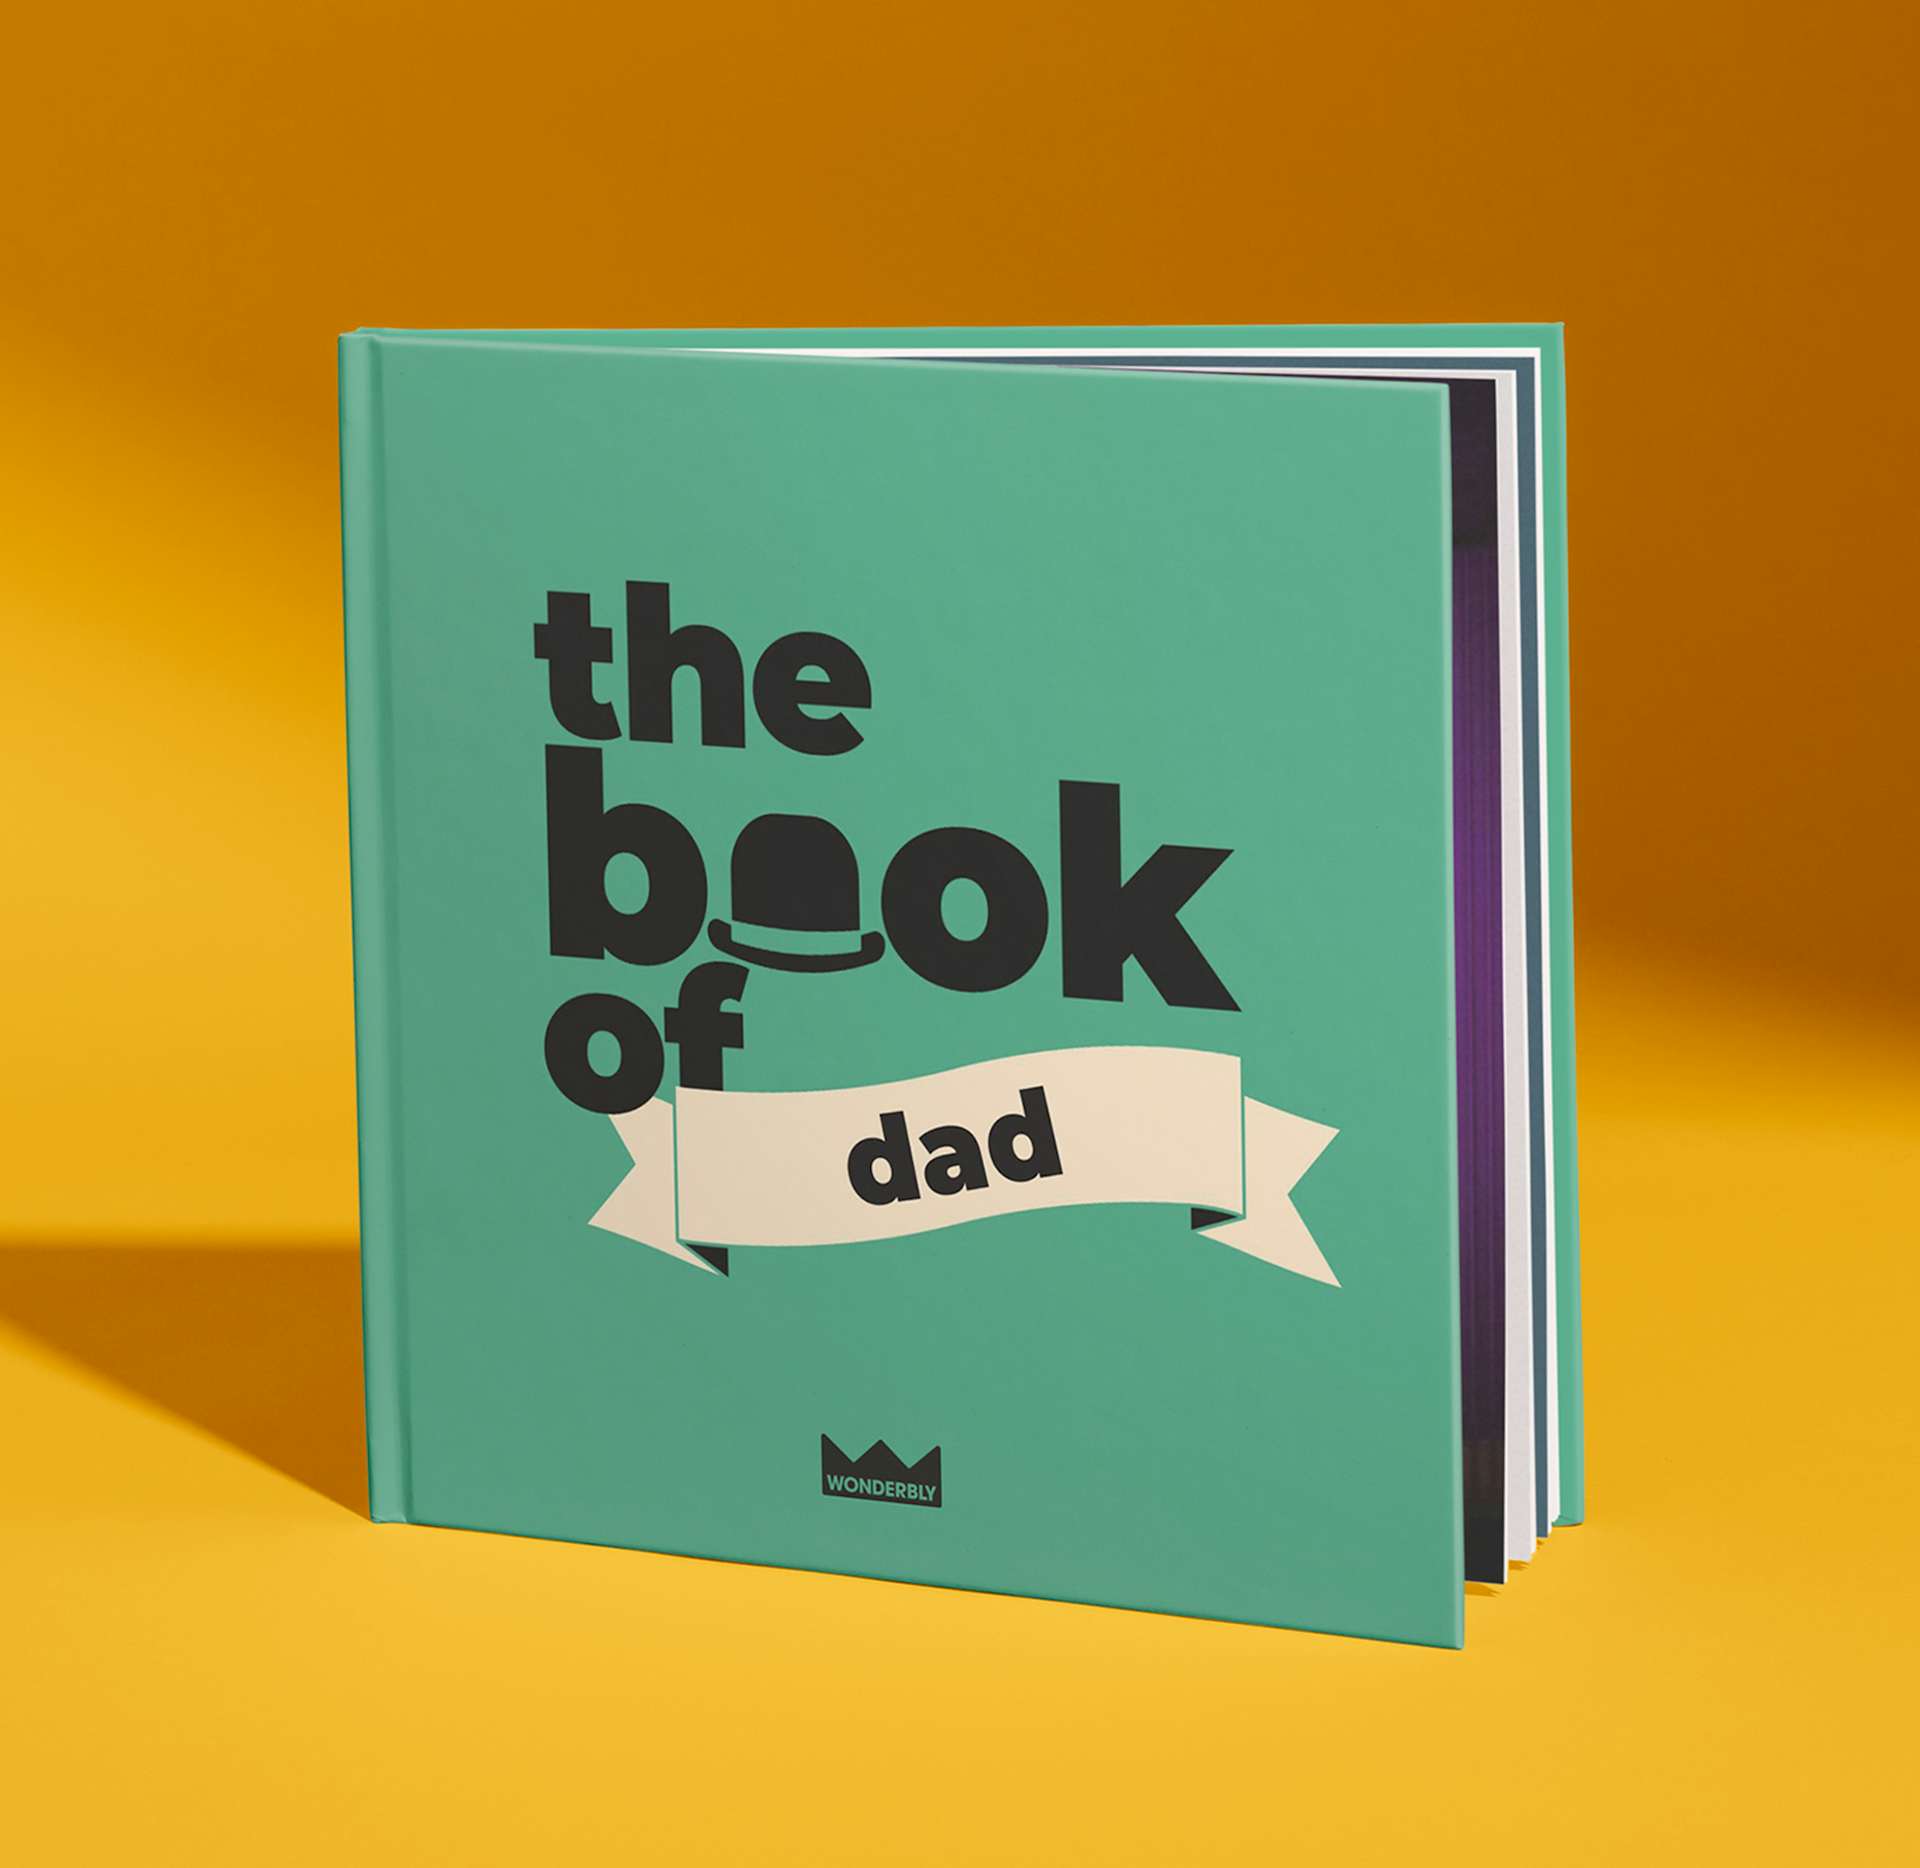 Example of the personalised book of dad